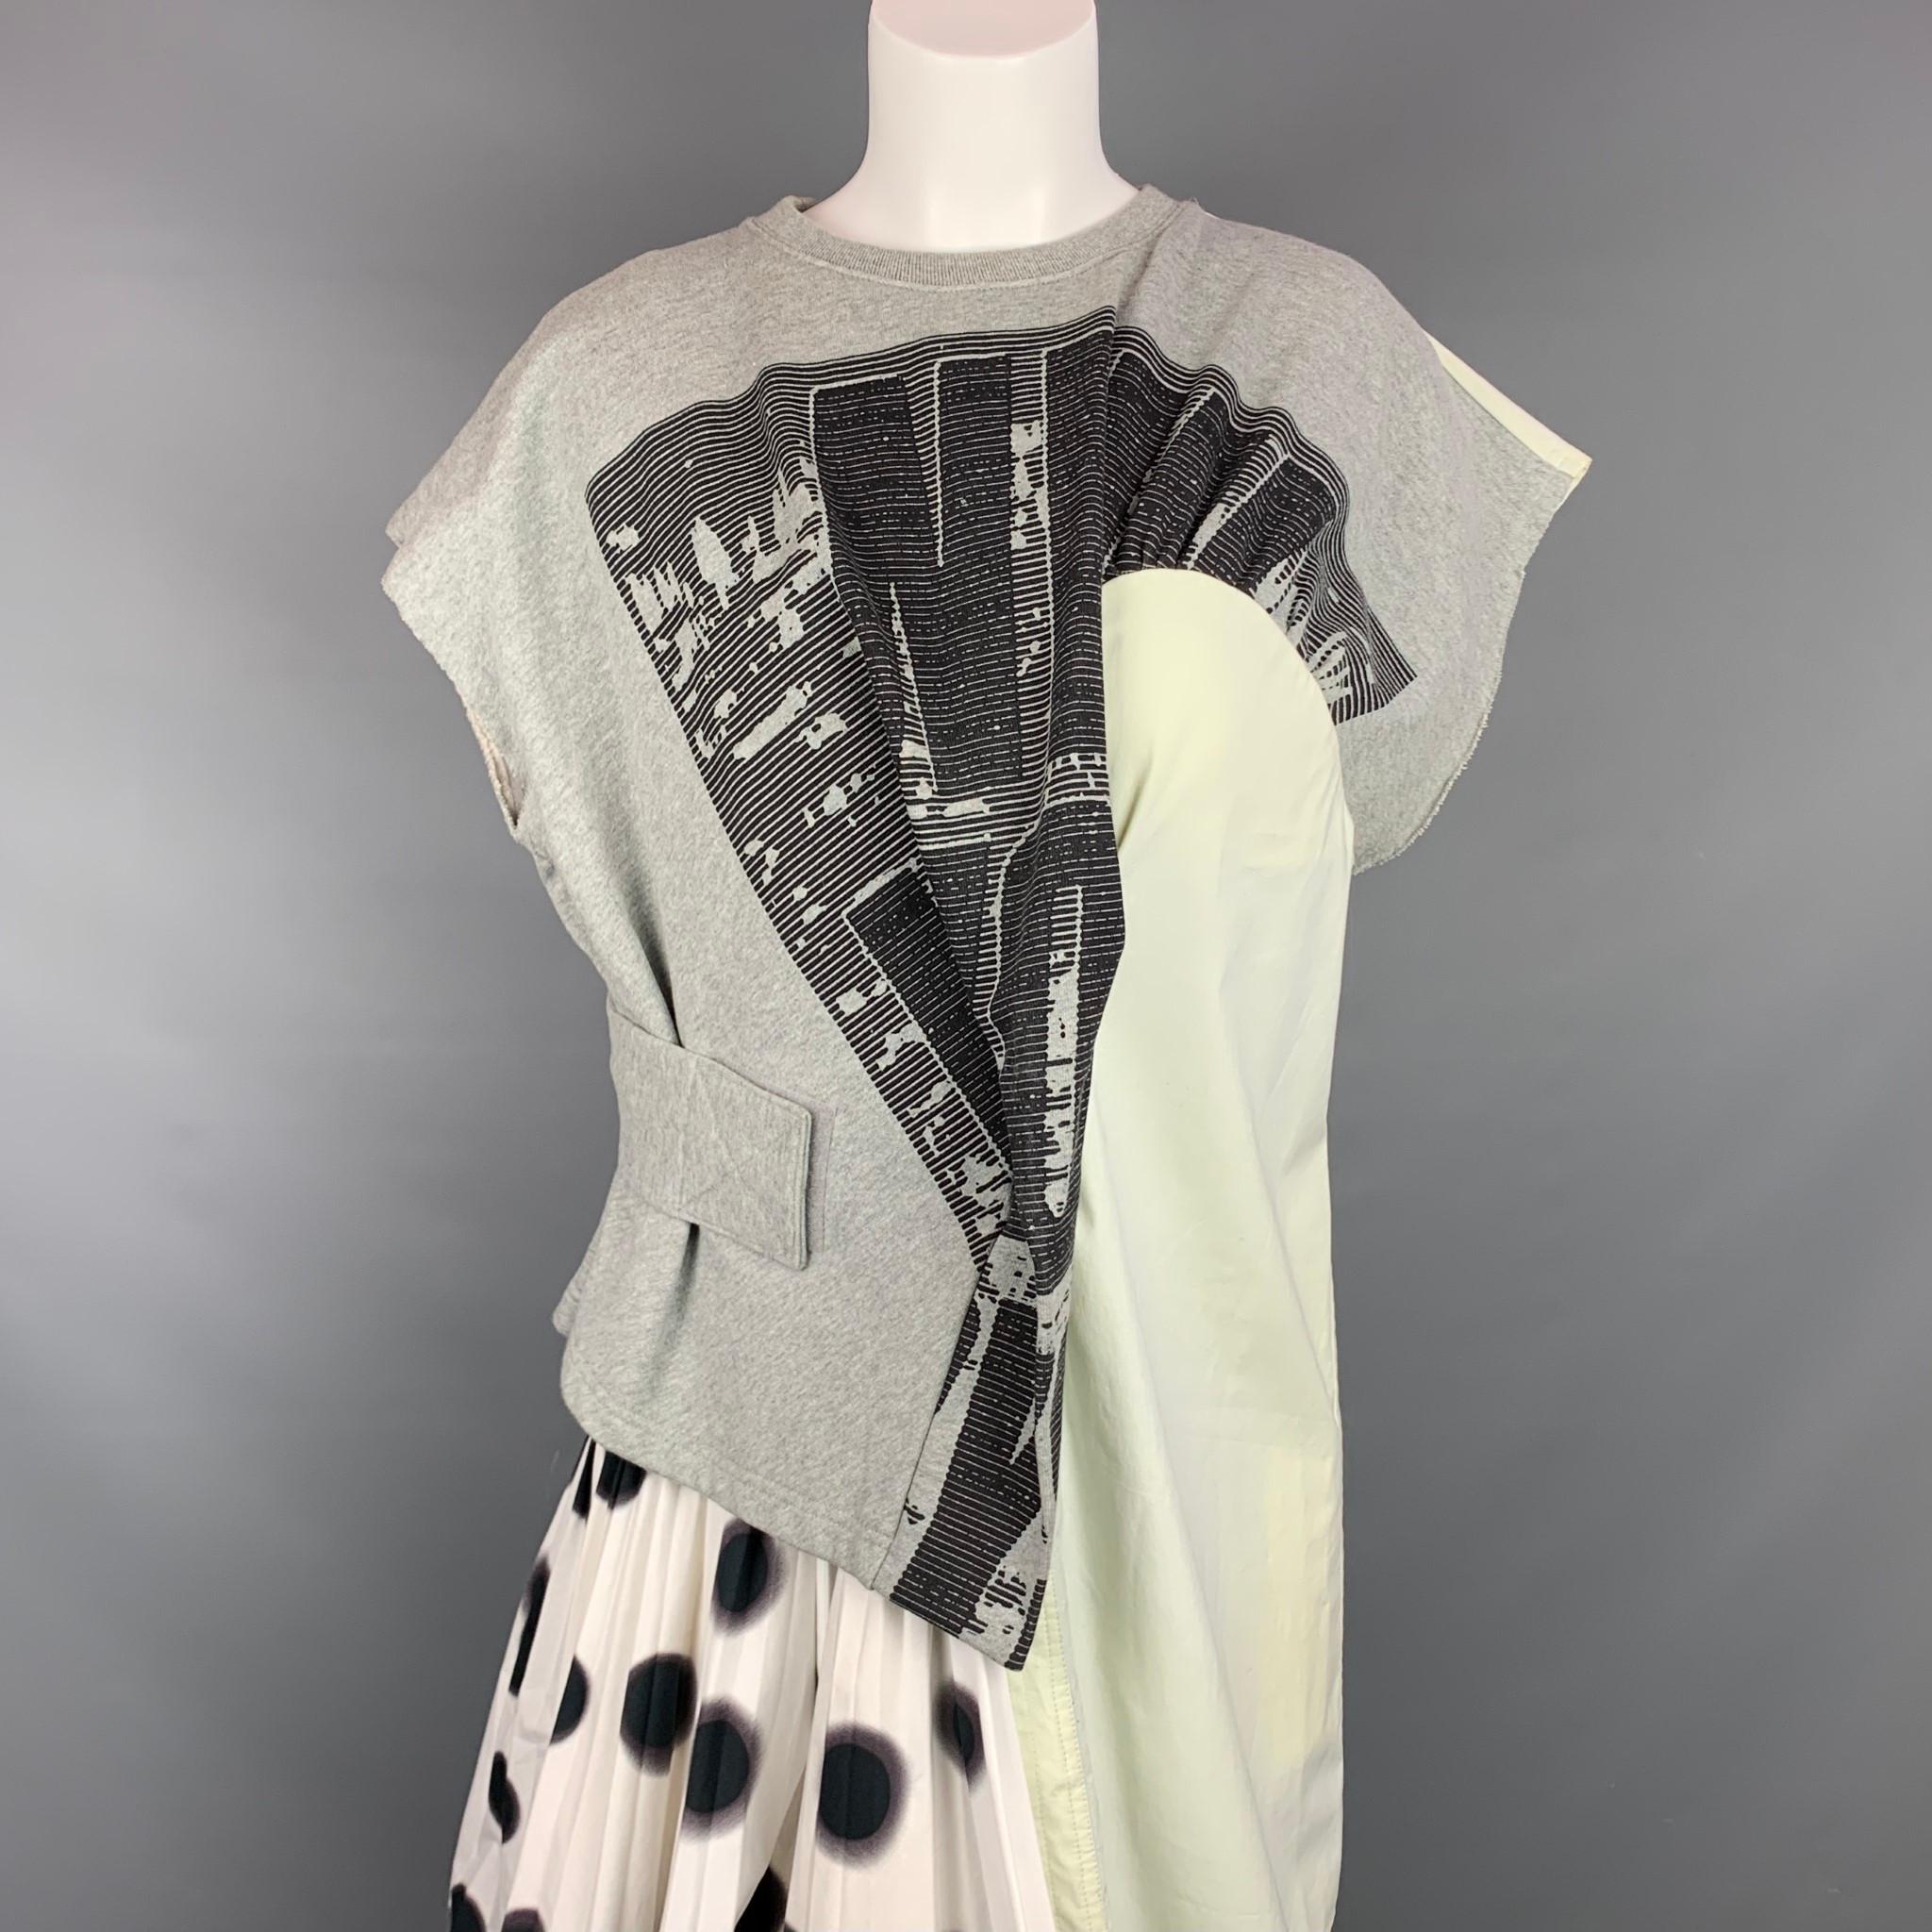 MARC by MARC JACOBS dress comes in a gray & white blurred dot print featuring a asymmetrical style, pleated skirt trim, strap detail, loose fit, back pocket, and a crew-neck.

Very Good Pre-Owned Condition.
Marked: S

Measurements:

Shoulder: 23